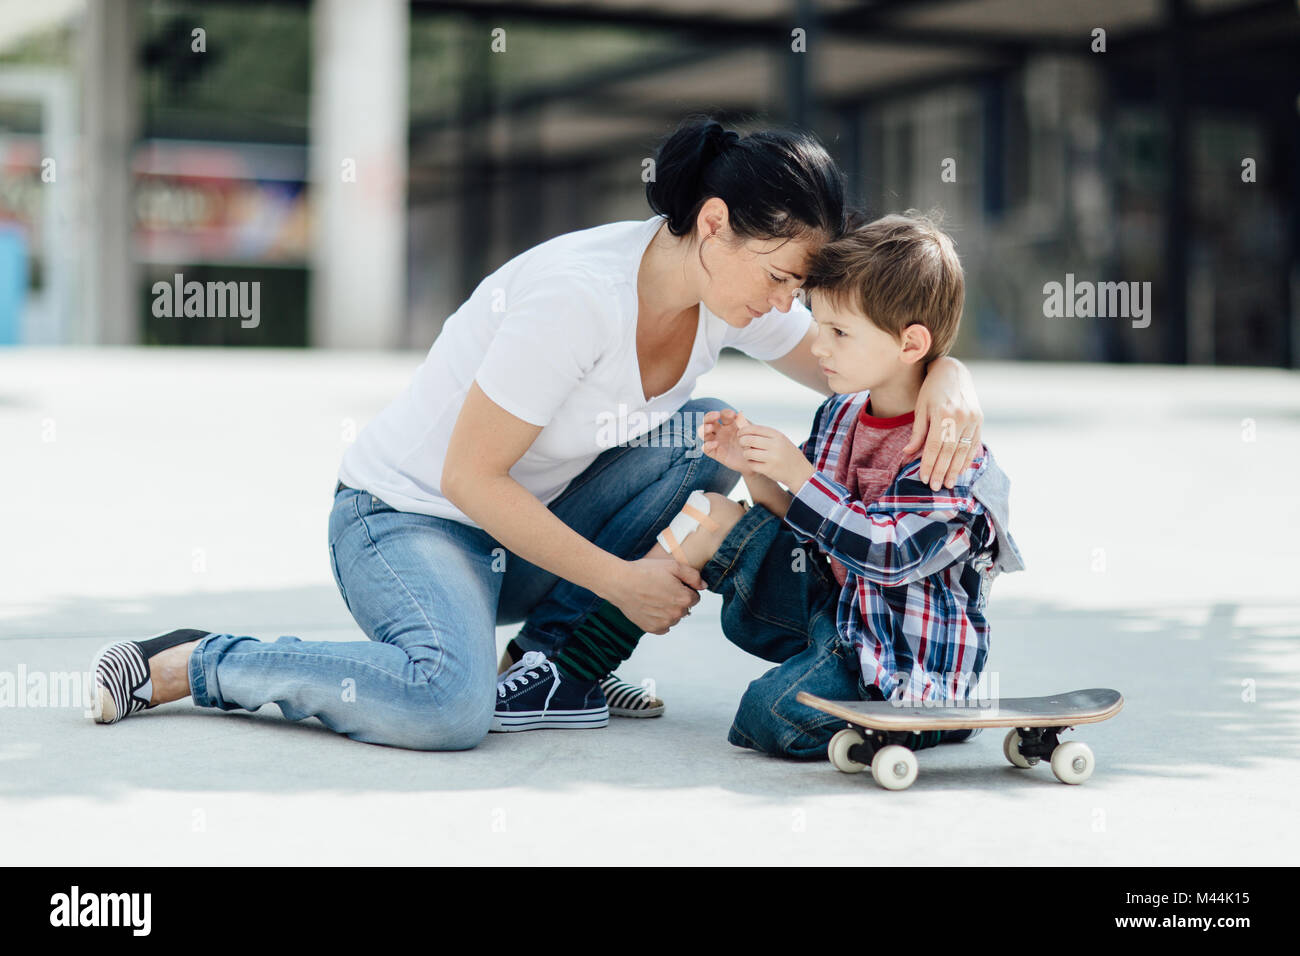 Portrait of a mother hugging her young skater boy with an injured knee Stock Photo